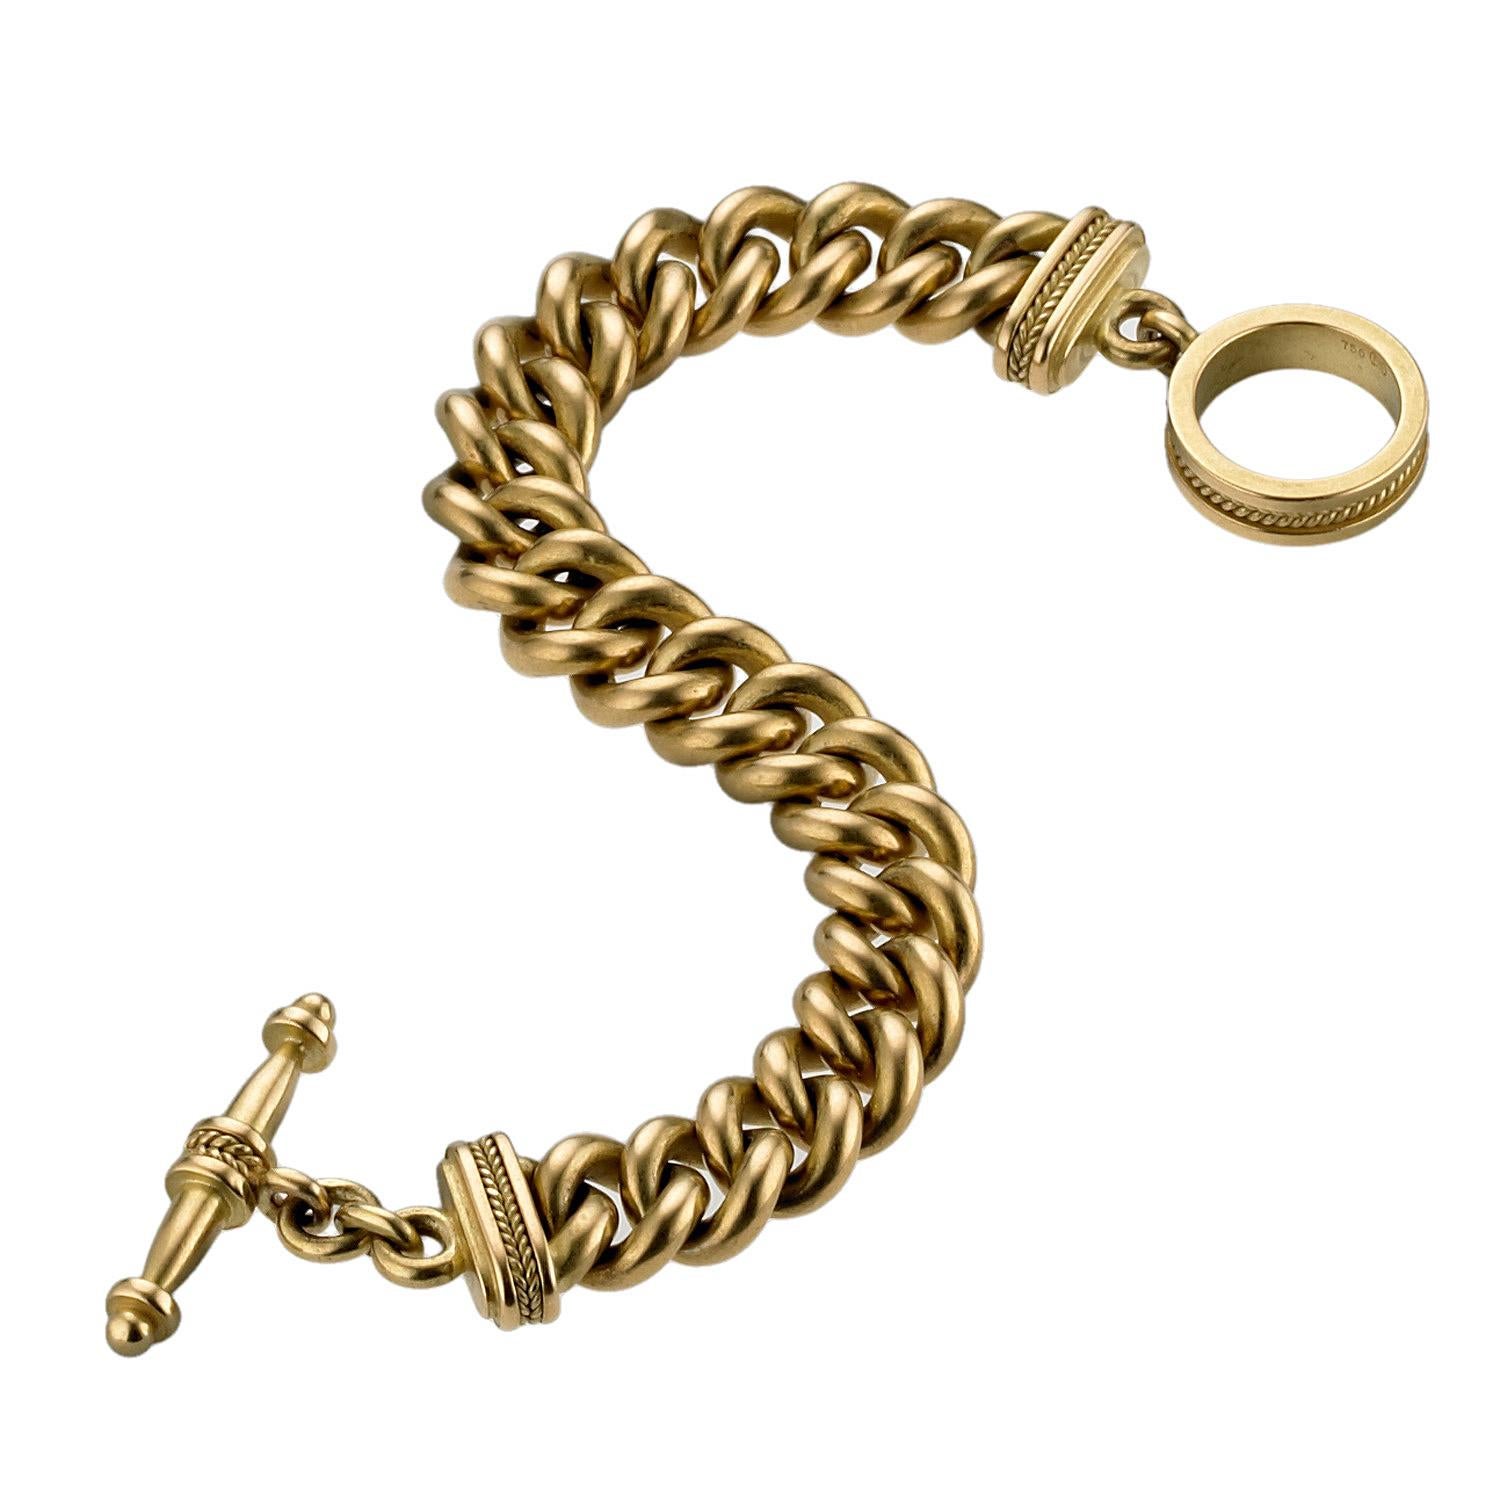 A heavy and silky smooth solid gold chain link bracelet. The toggle is embellished with finely wrought twisted gold wire. The bracelet is truly a classic, impressive, durable piece that can be worn daily. Custom made to order. Please allow 8 weeks